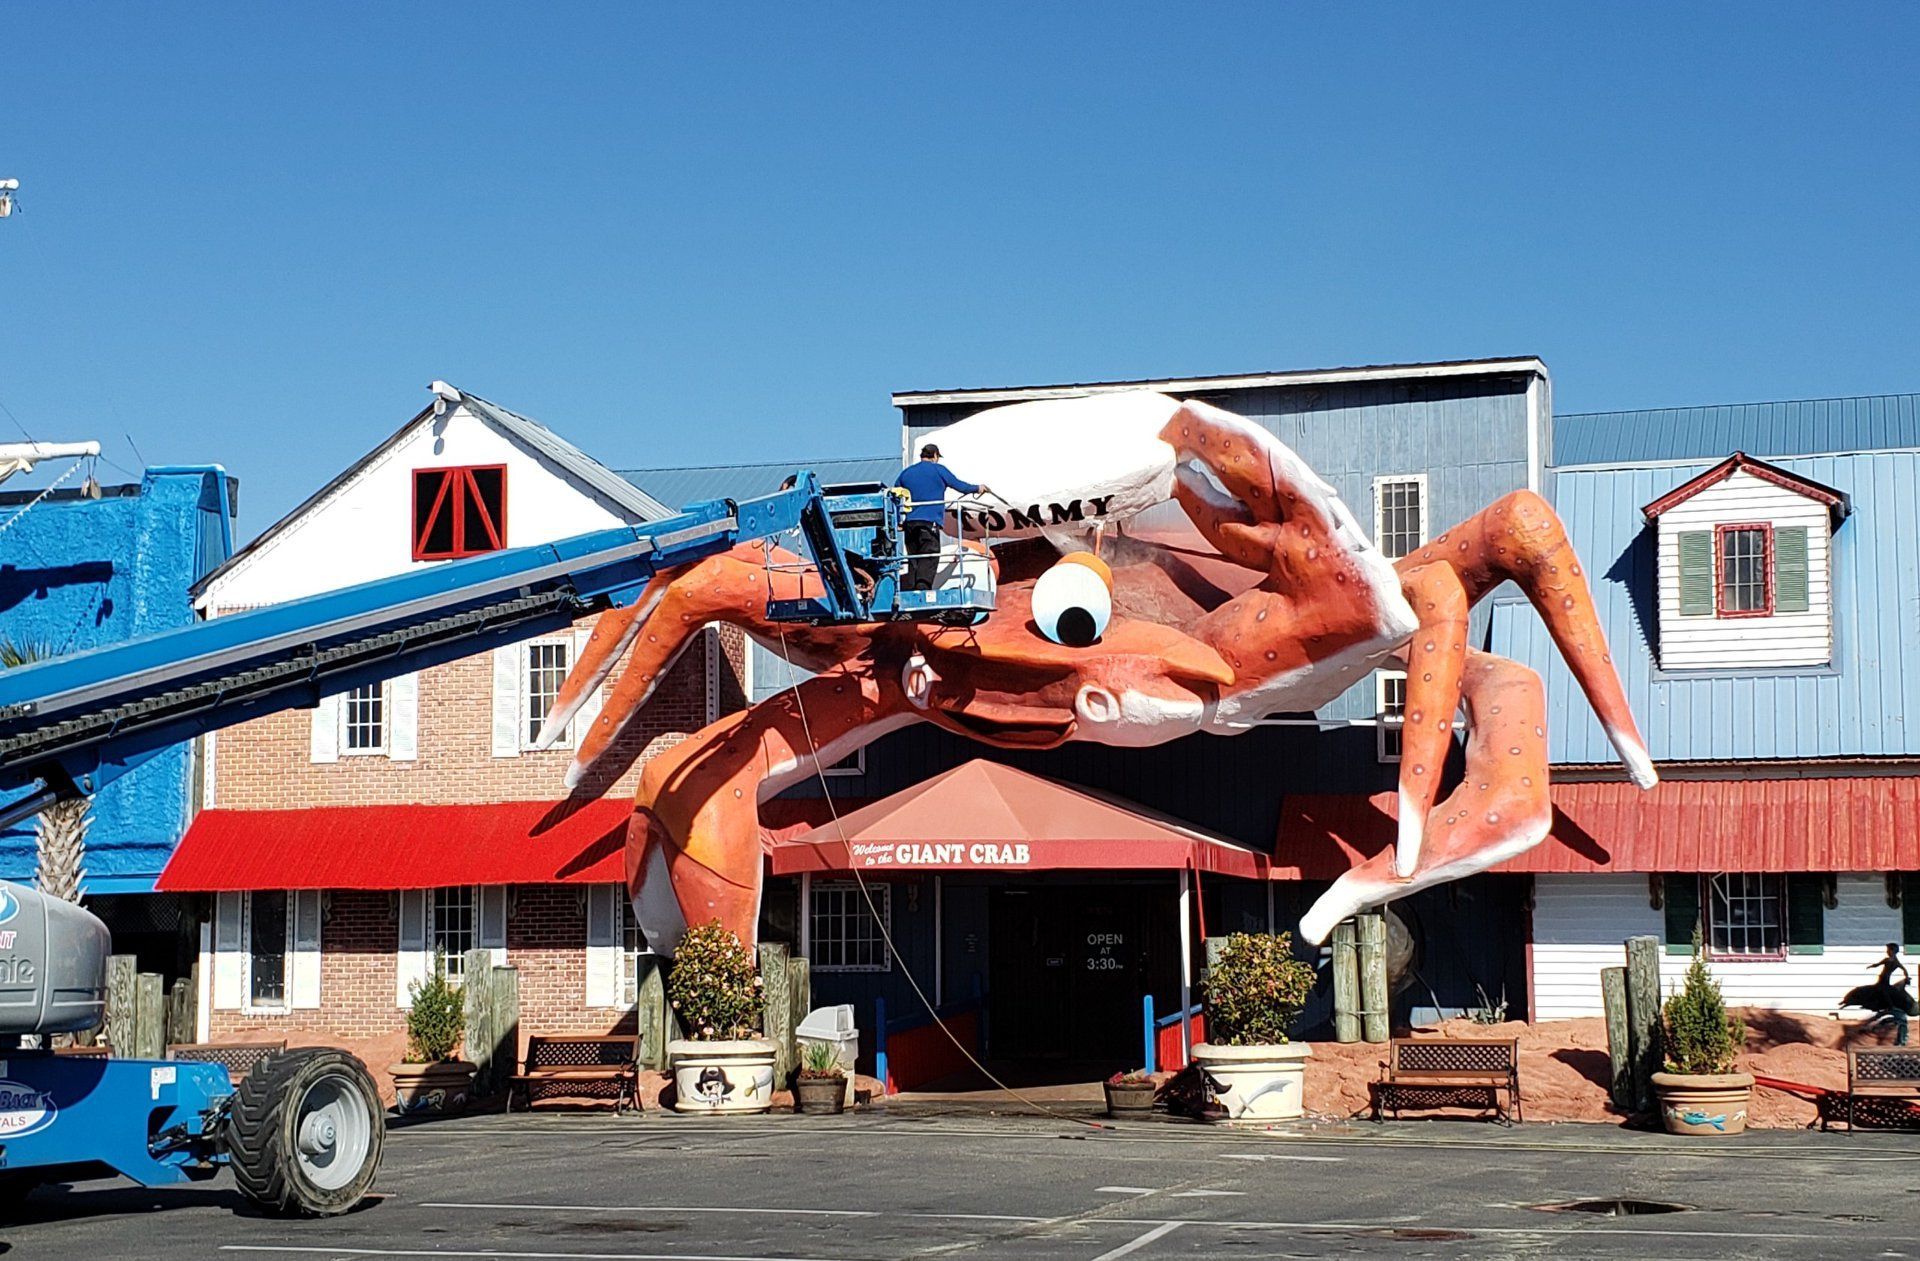 
World's Largest Crab Sculpture, world record in Myrtle Beach, South Carolina